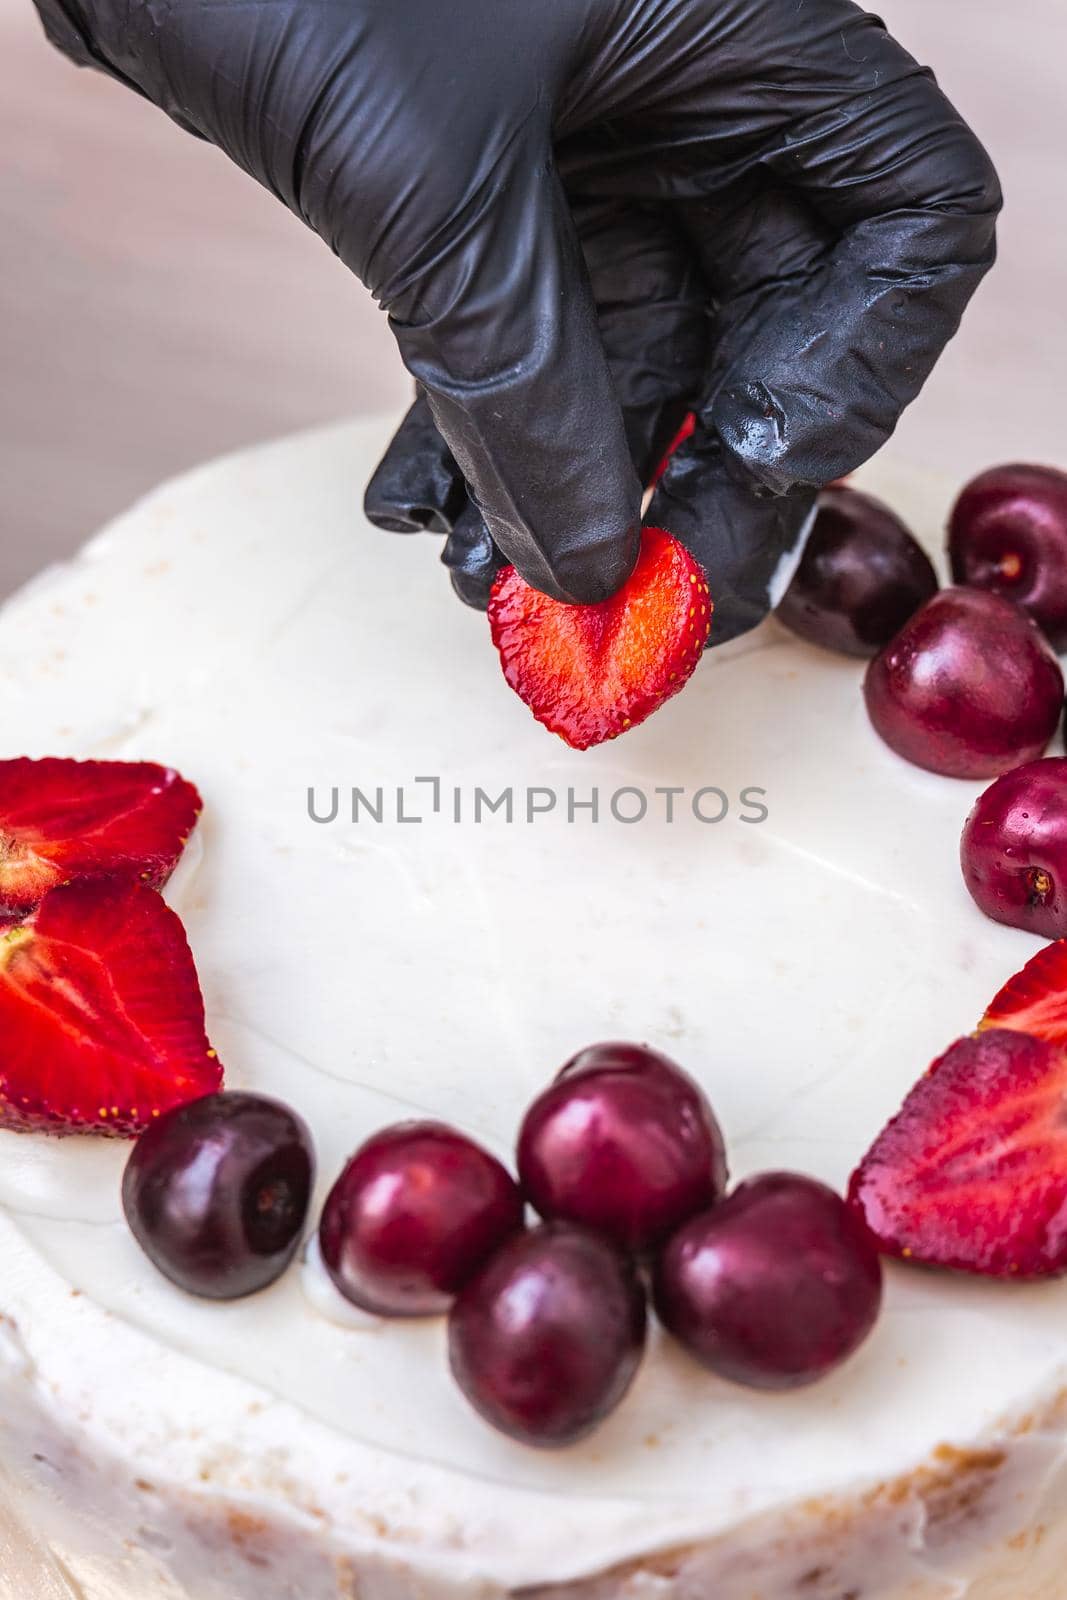 Female hand in black glove puts cherries and strawberries on top of cheesecake with coconut.